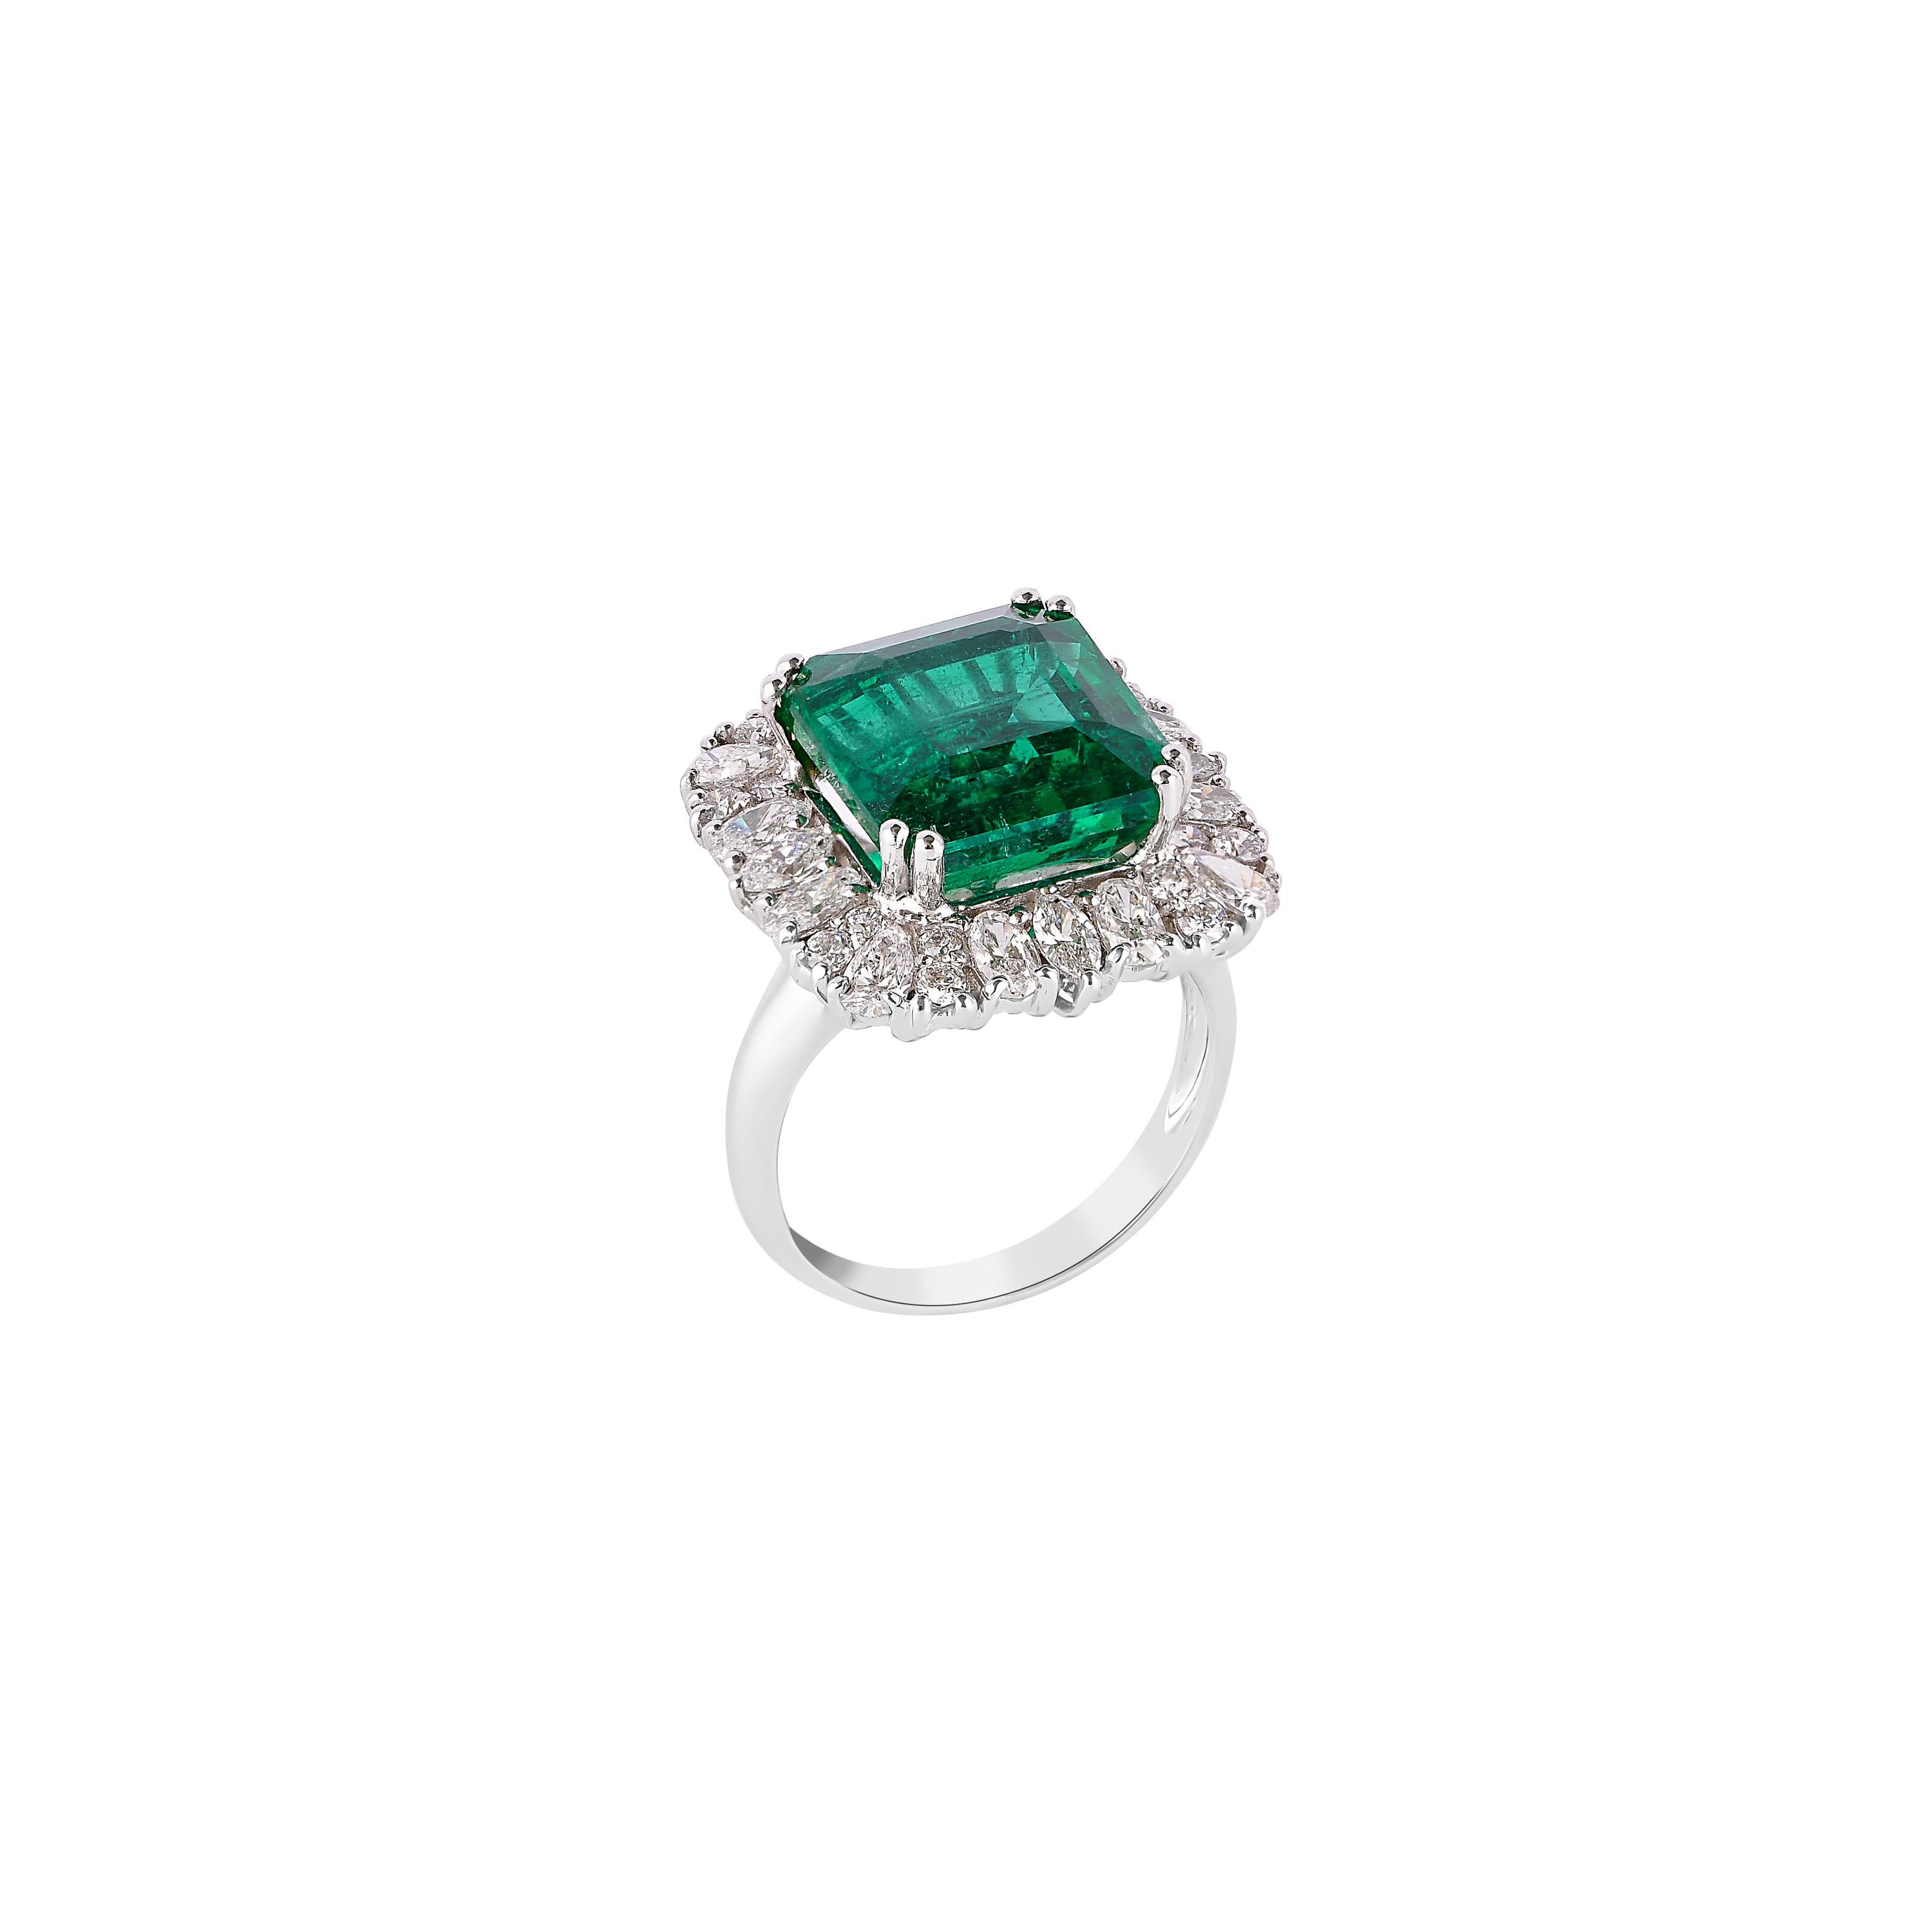 Contemporary GRS Certified 8.9 Carat Zambian Emerald & Diamond Ring in 18 Karat White Gold For Sale